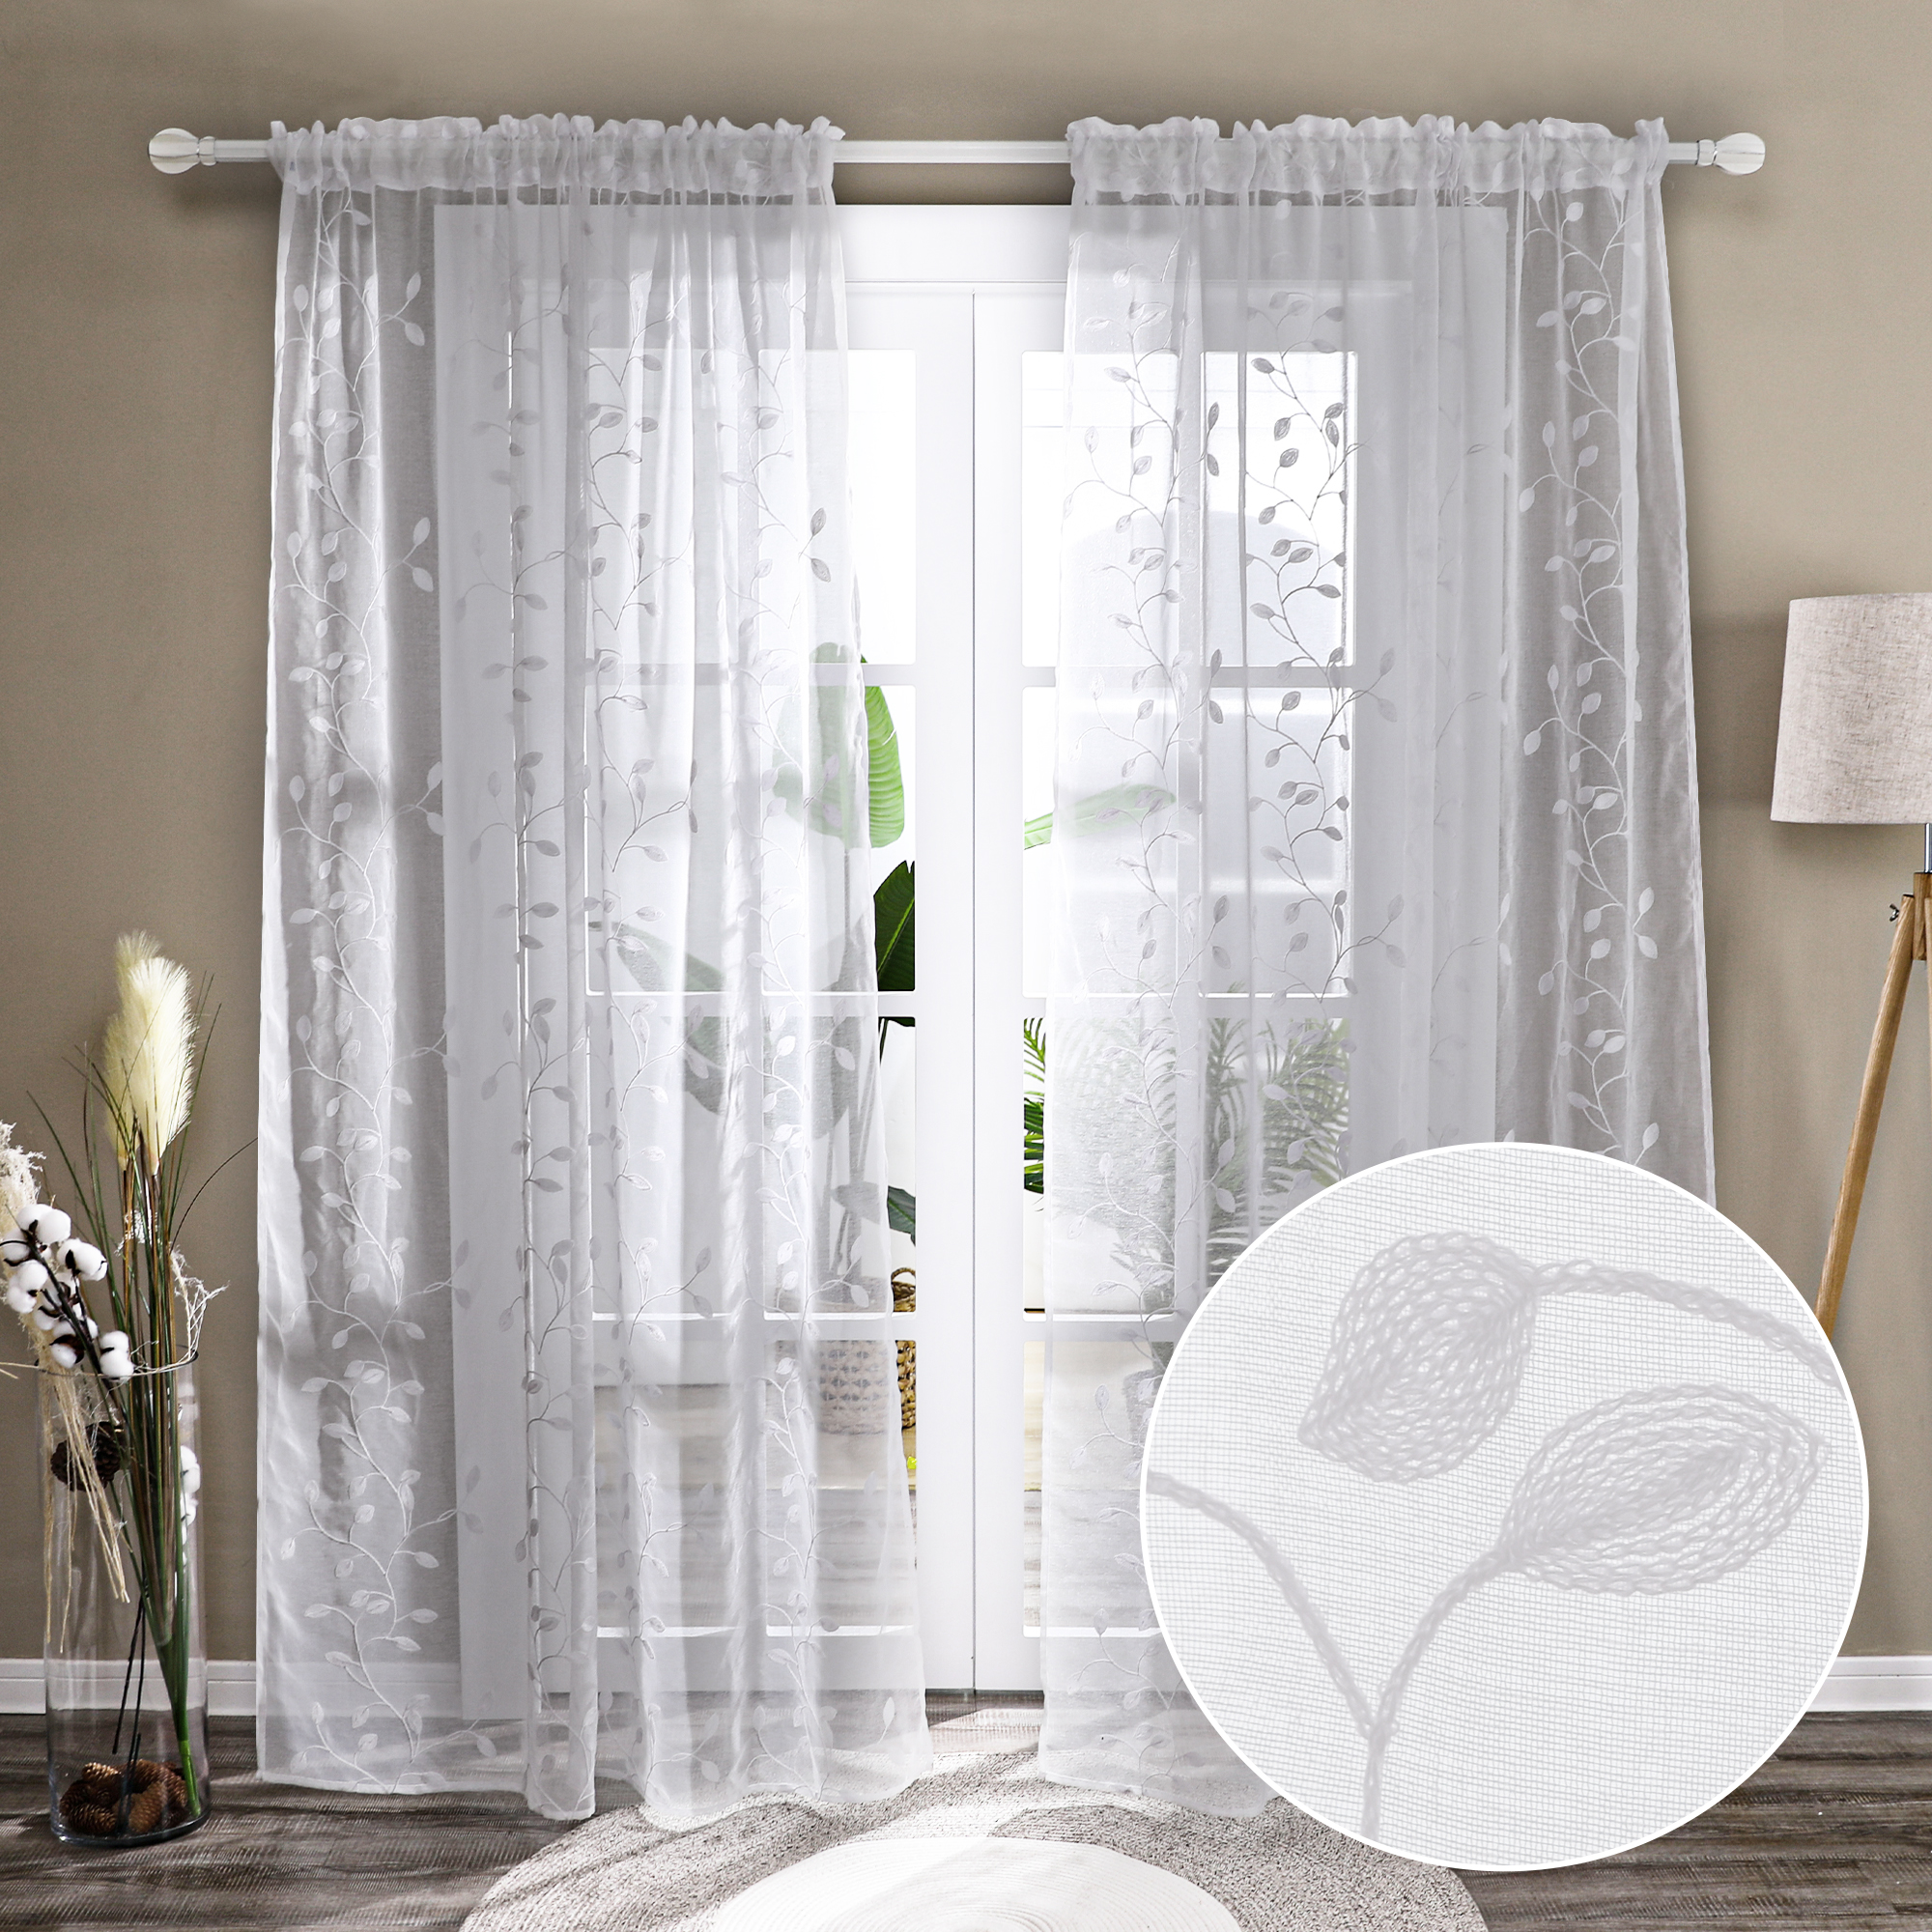 Deconovo Leaf Embroidered Sheer Curtains 2 Panels -$8.80~$13.30 + Free Shipping w/ Prime $9.6